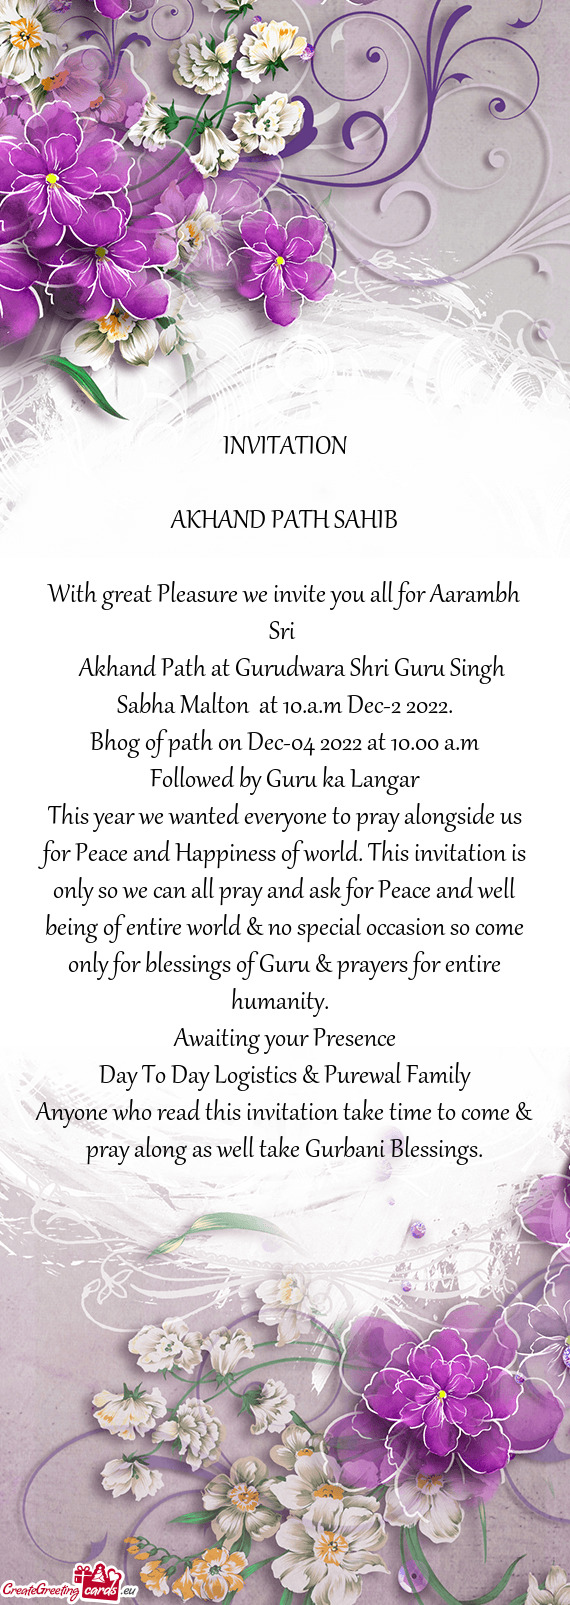 With great Pleasure we invite you all for Aarambh Sri